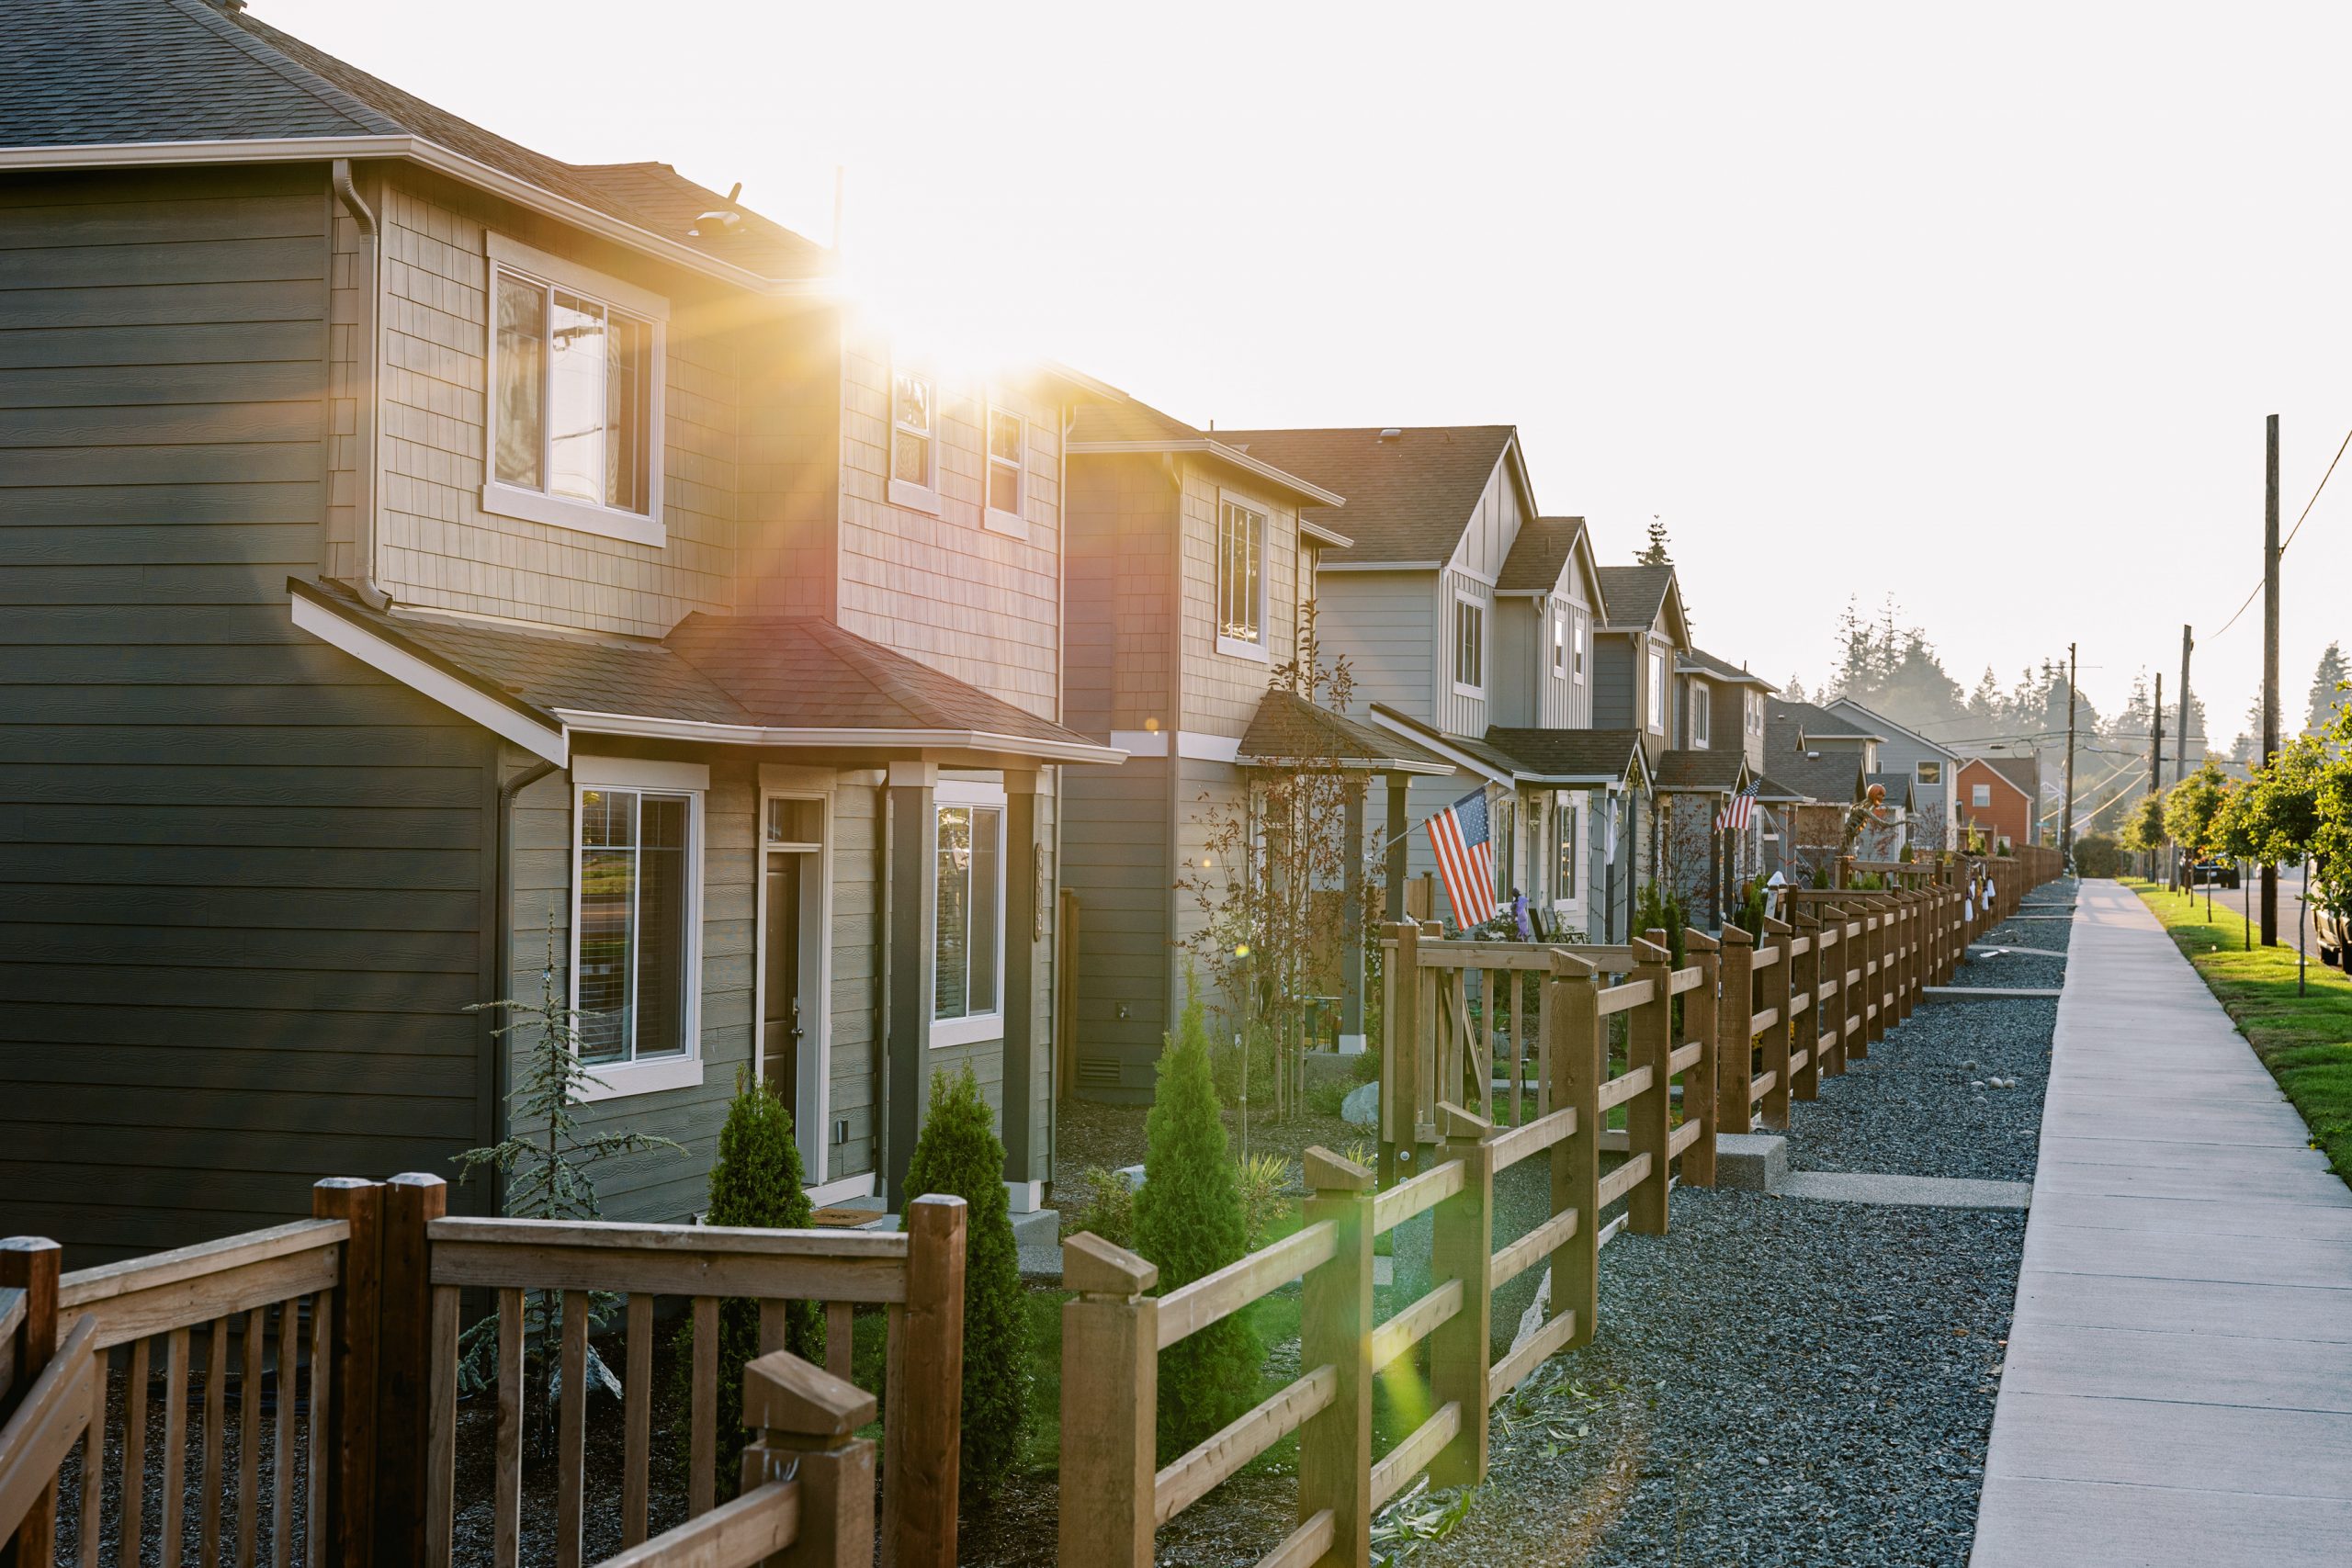 Welcome to Cedarhome, located in Stanwood! Our community, north of Stanwood High School and Church Creek, offers diverse home styles, from charming farmhouses to modern houses.